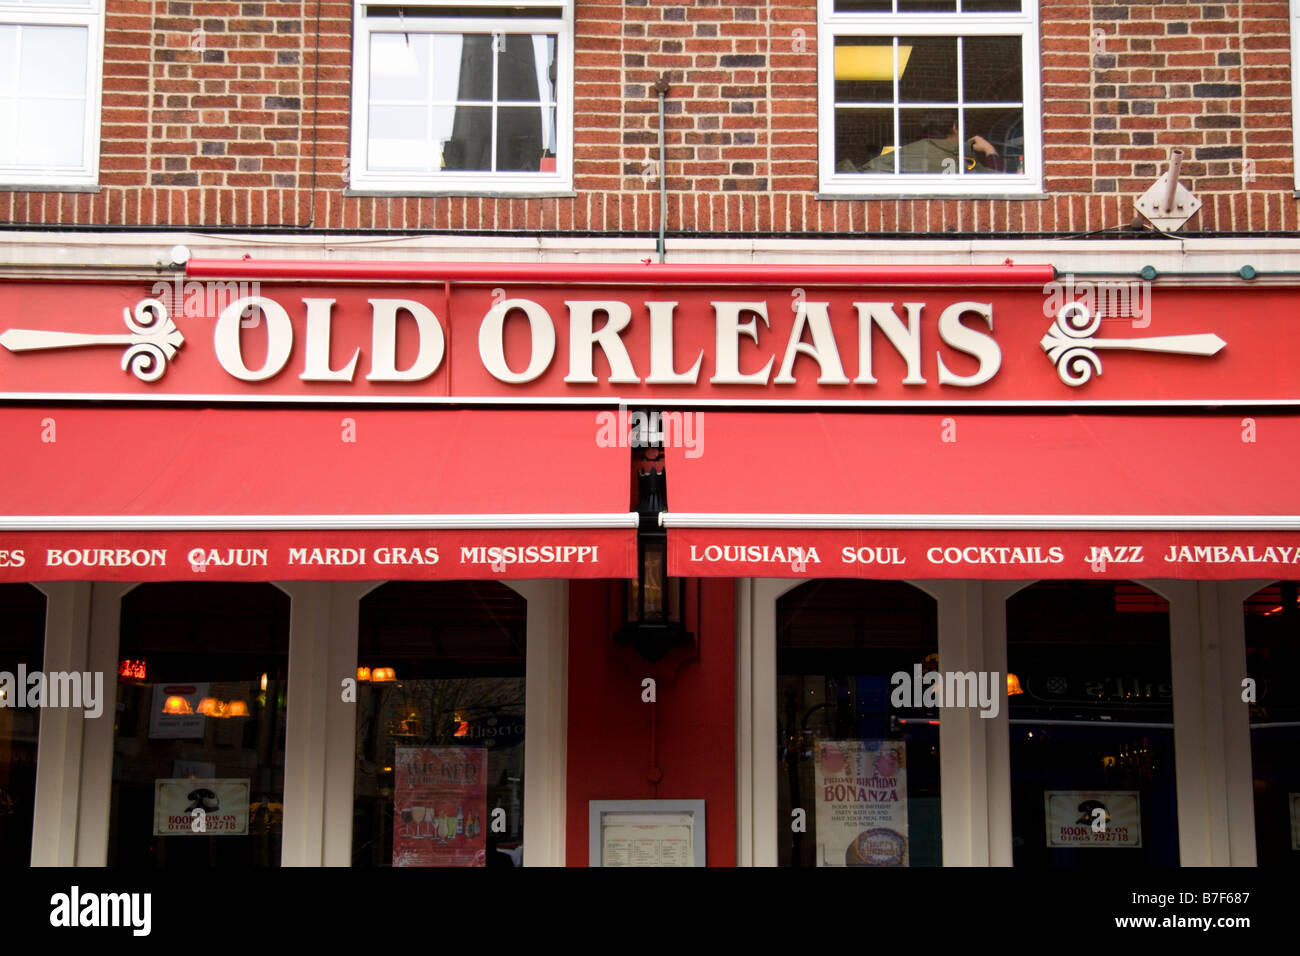 The front view of an Old Orleans restaurant in Oxford, England. Jan 2009 Stock Photo